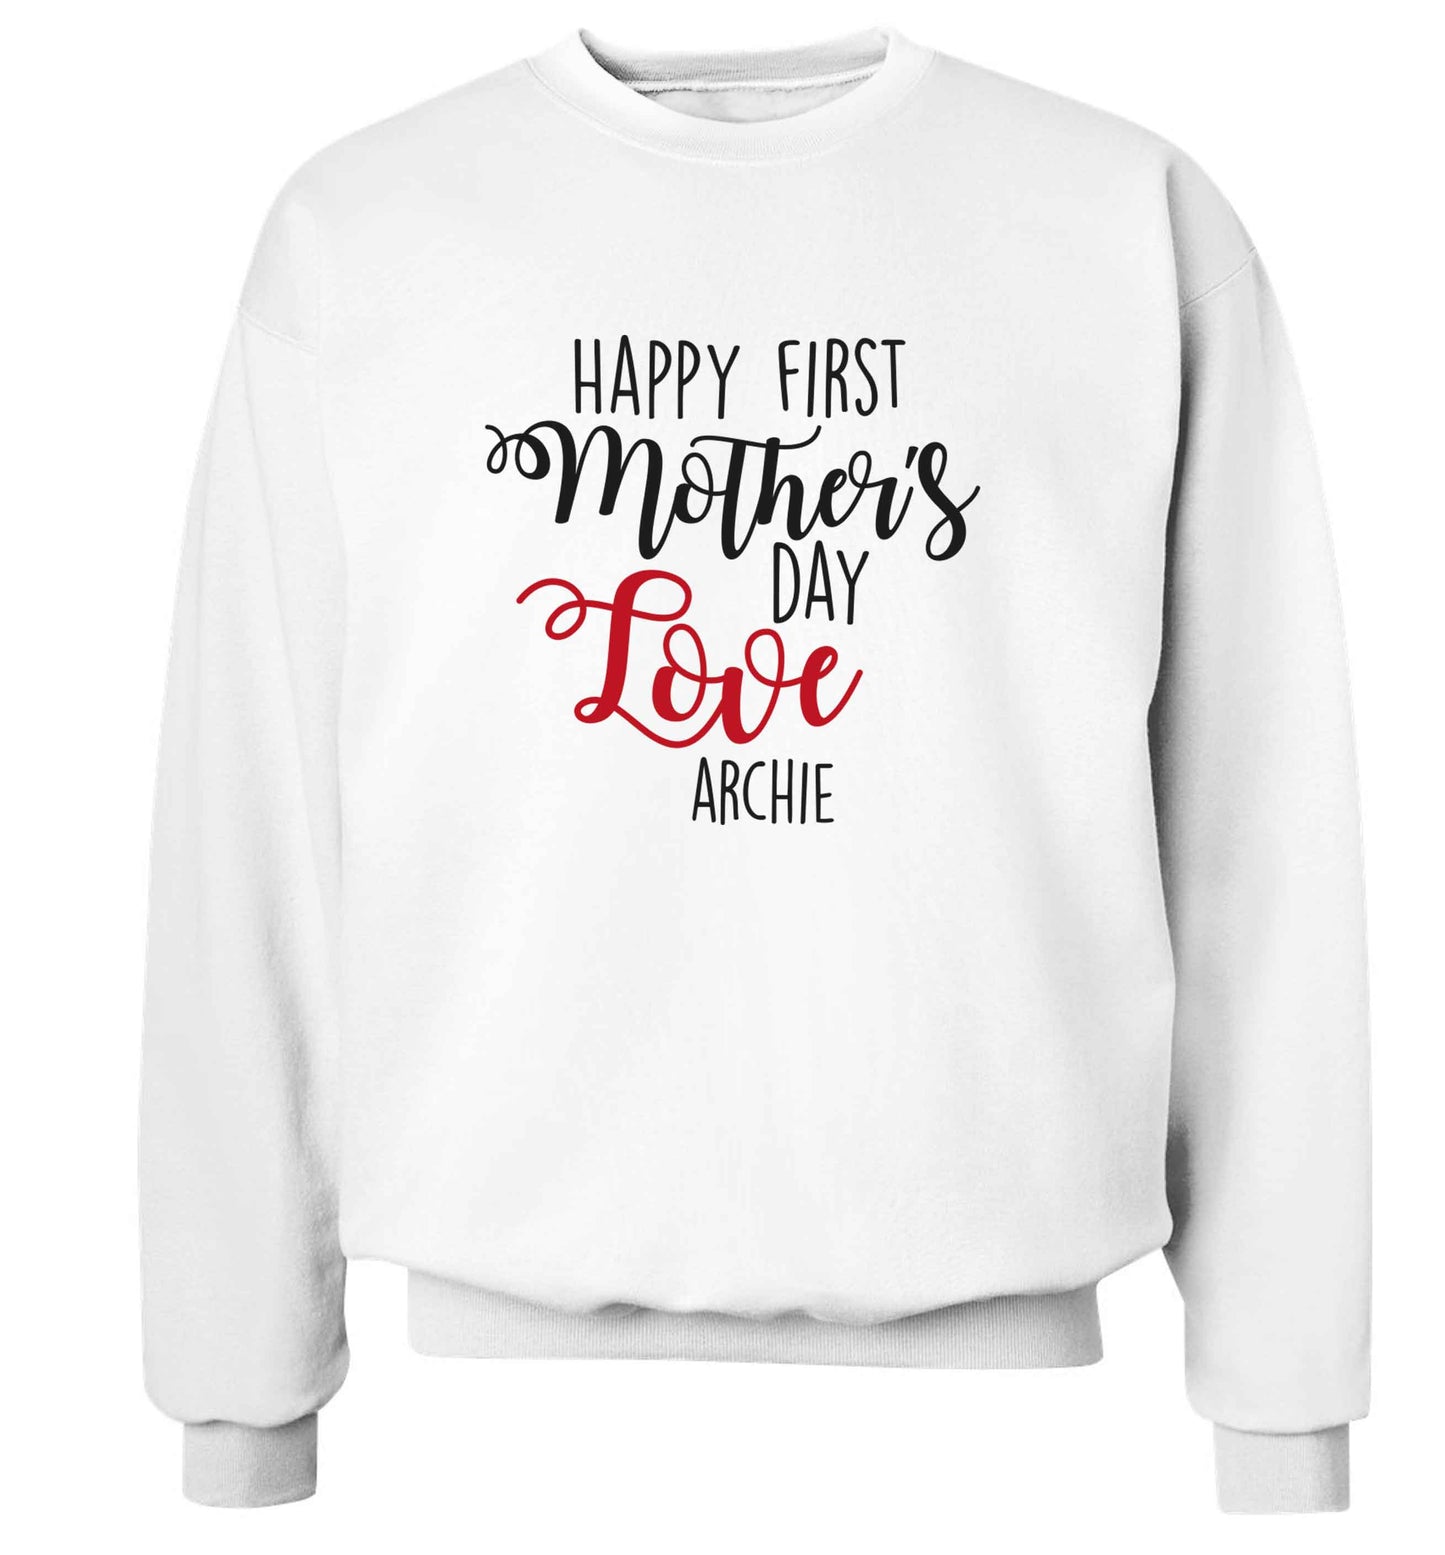 Personalised happy first mother's day love adult's unisex white sweater 2XL